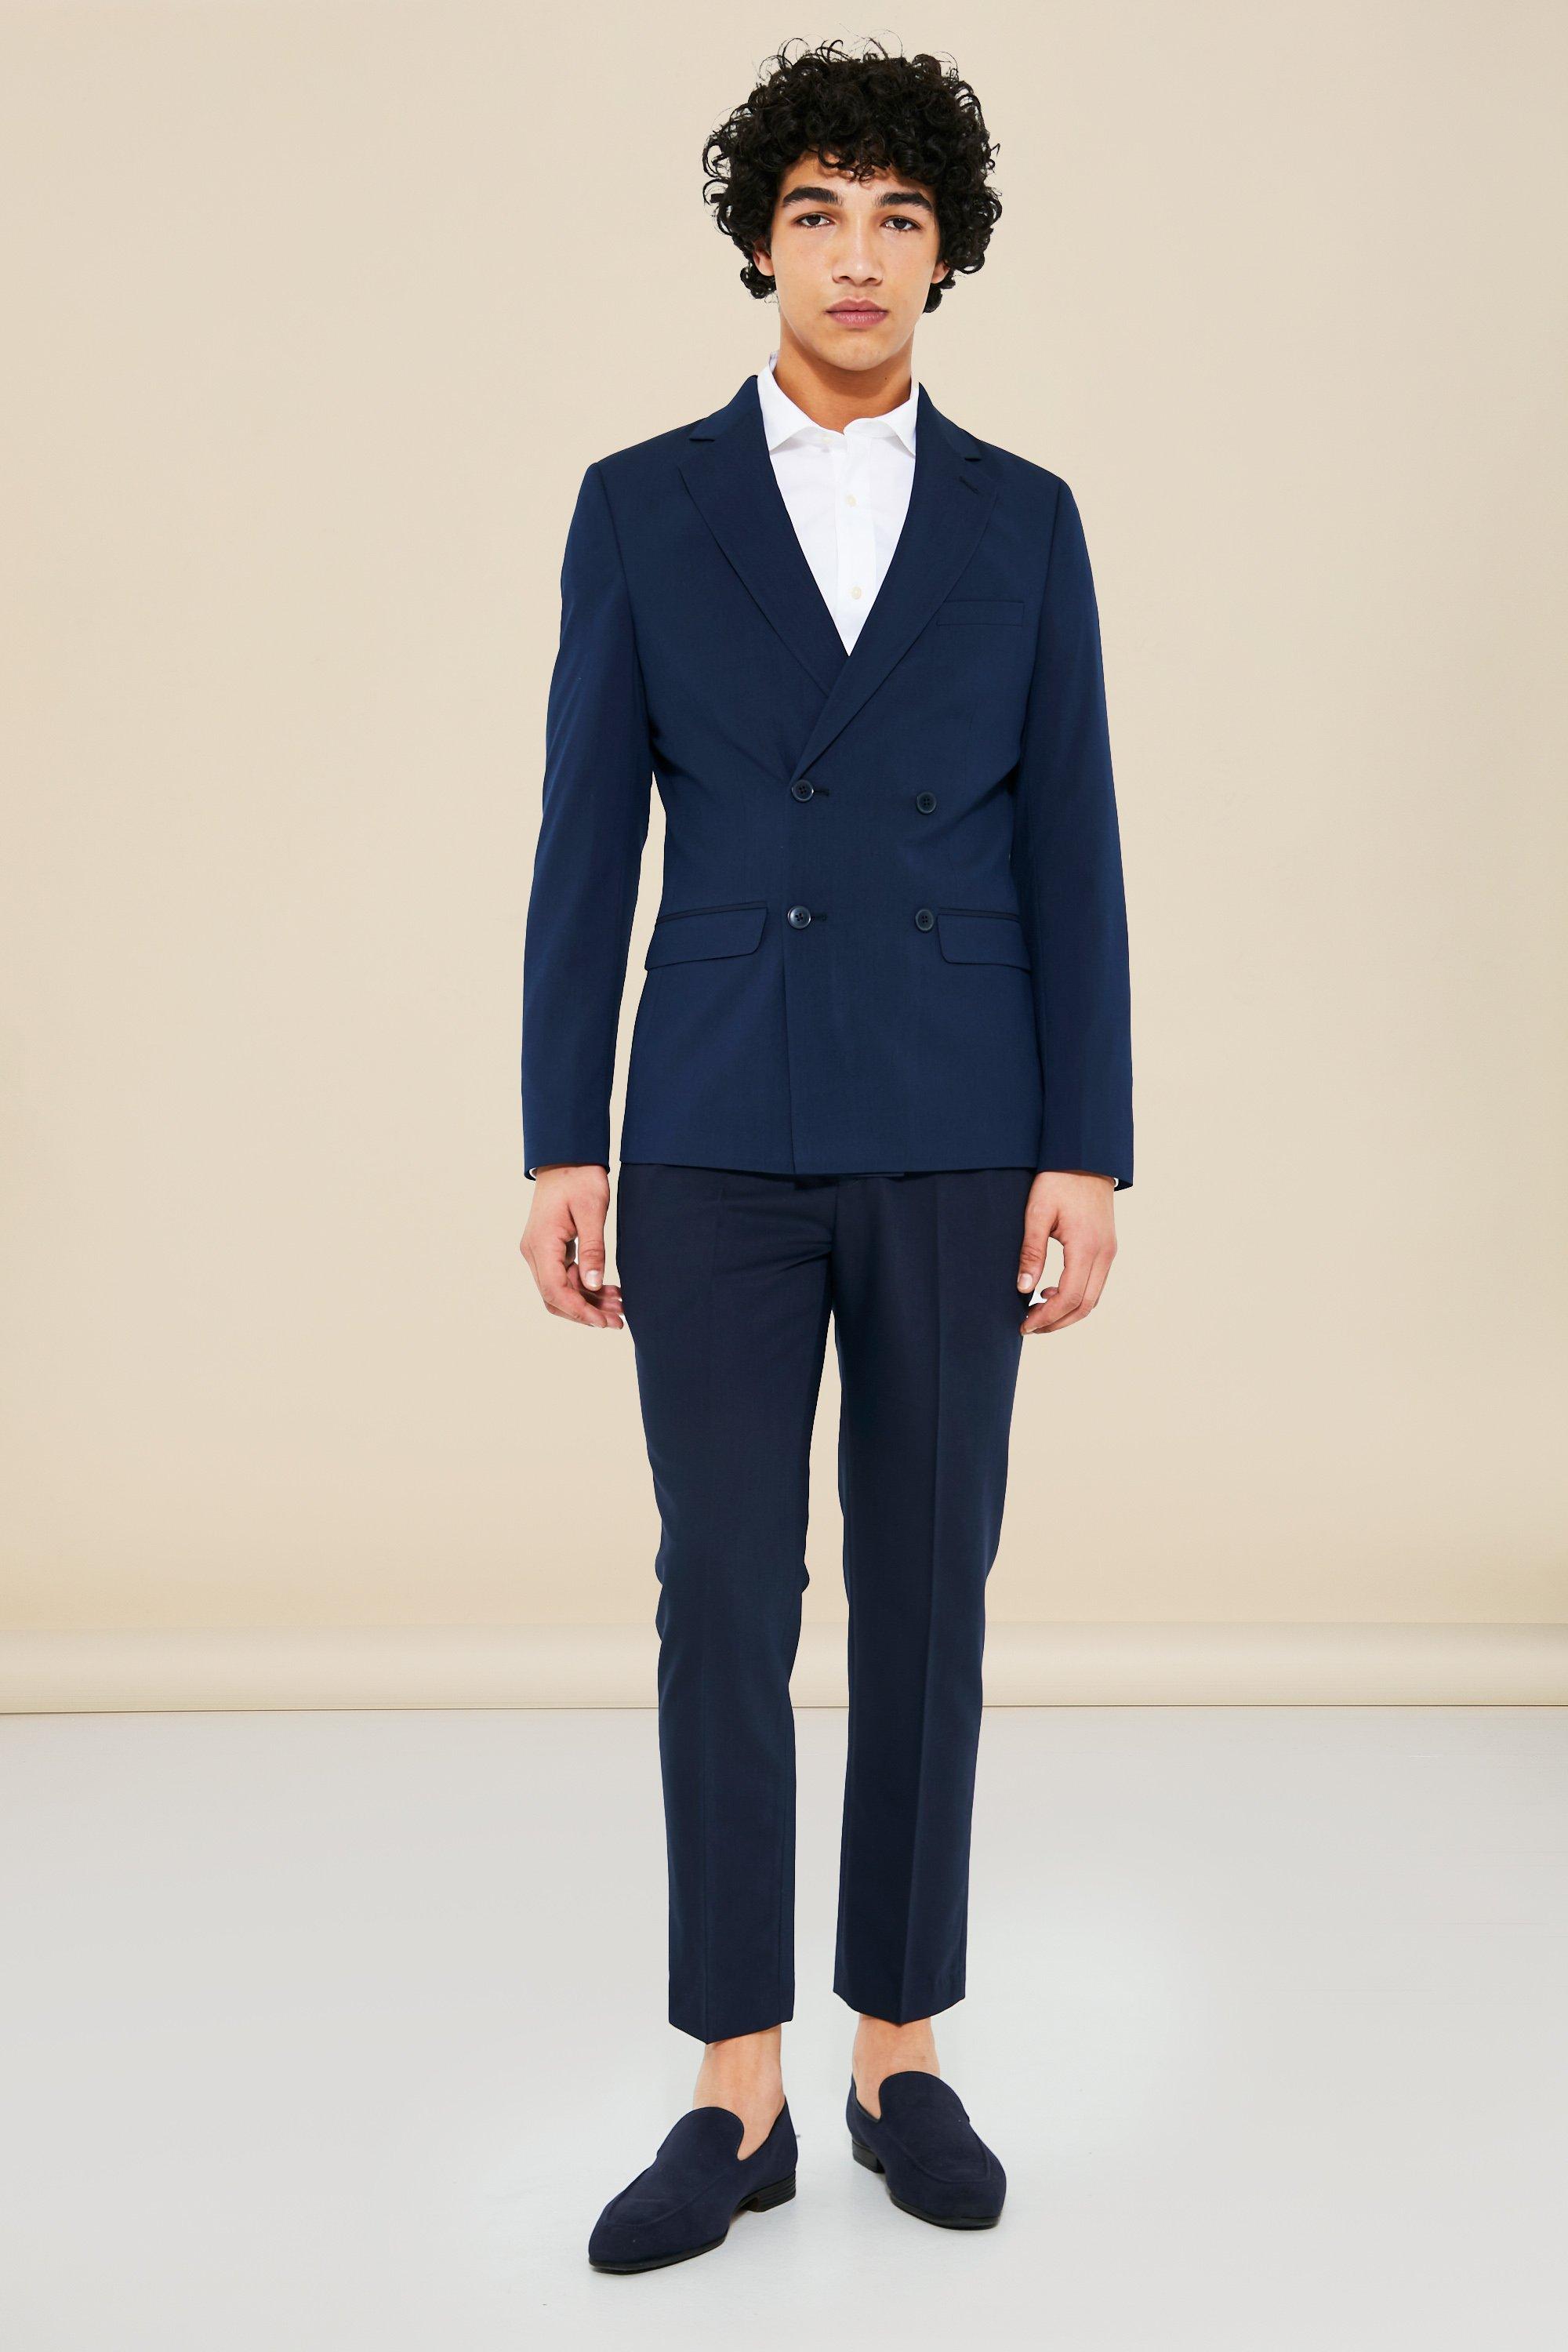 Image of Giacca completo a doppiopetto Super Skinny Fit, Navy